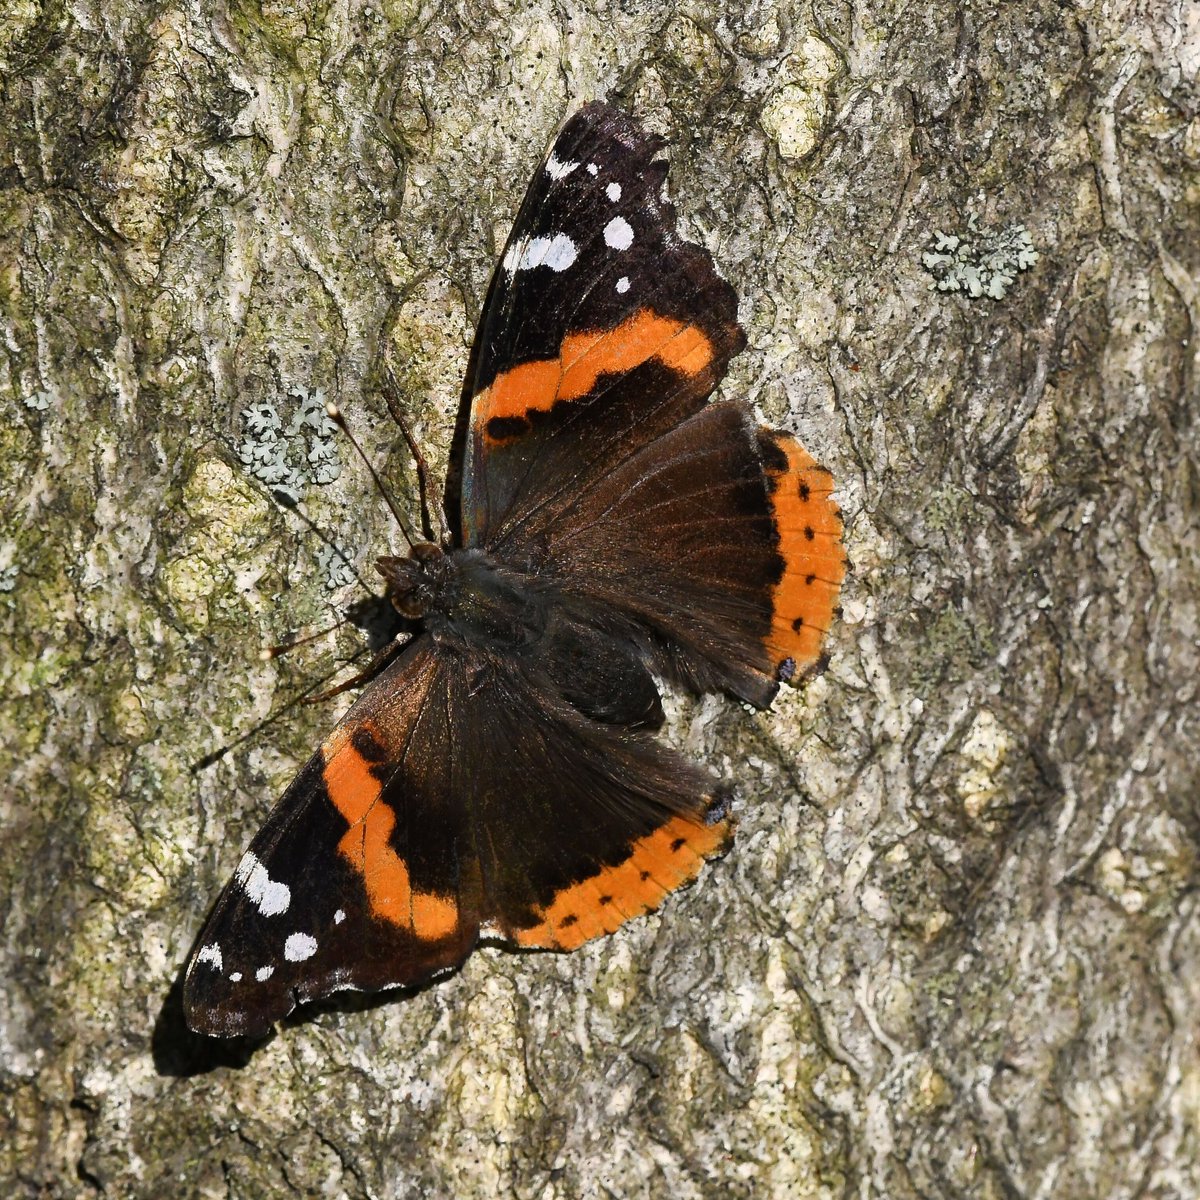 Red Admiral Butterfly (Vanessa atalanta) observed on the Marine Park Salt Marsh trail today.